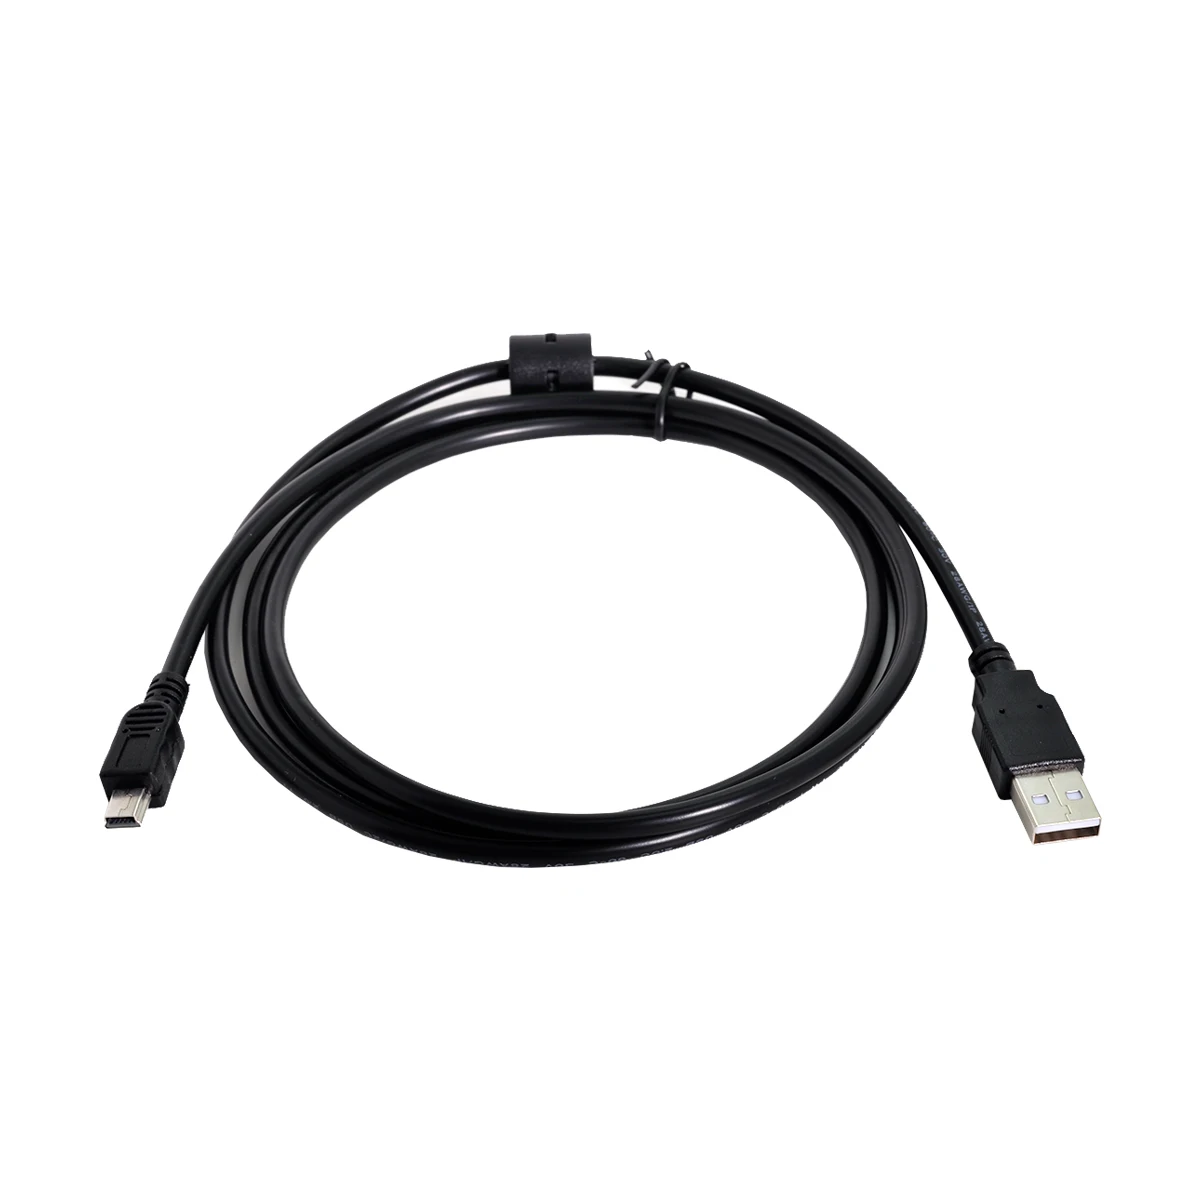 

Cablecc 3m 5m 8m Mini USB 5Pin to USB 2.0 Male Data Cable for Hard Disk & Camera & Phone